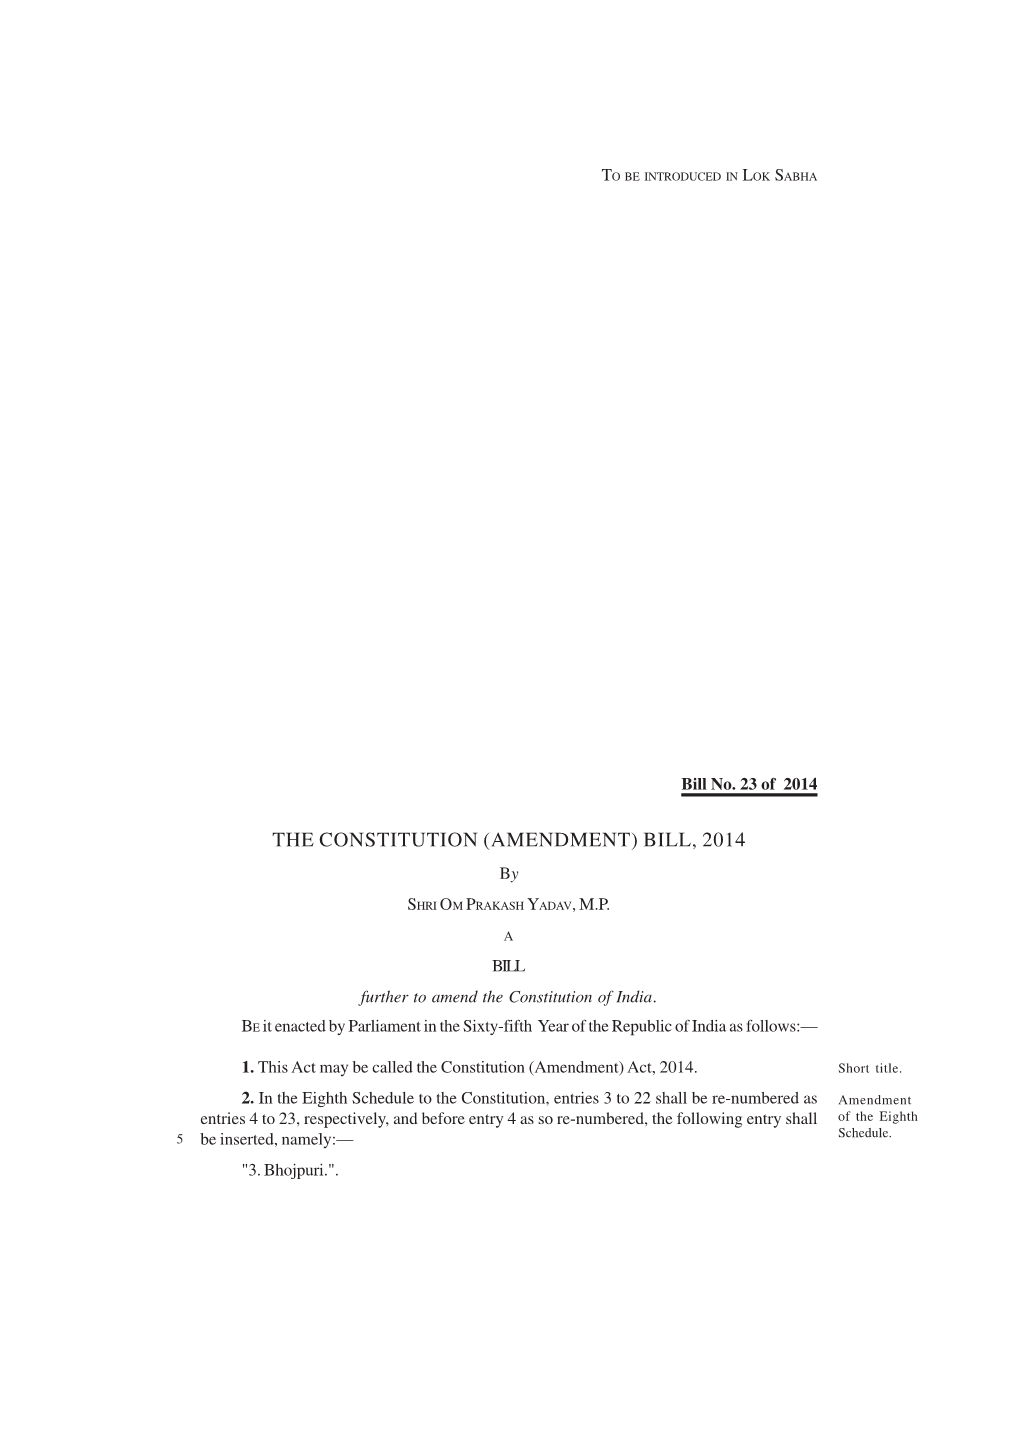 THE CONSTITUTION (AMENDMENT) BILL, 2014 By